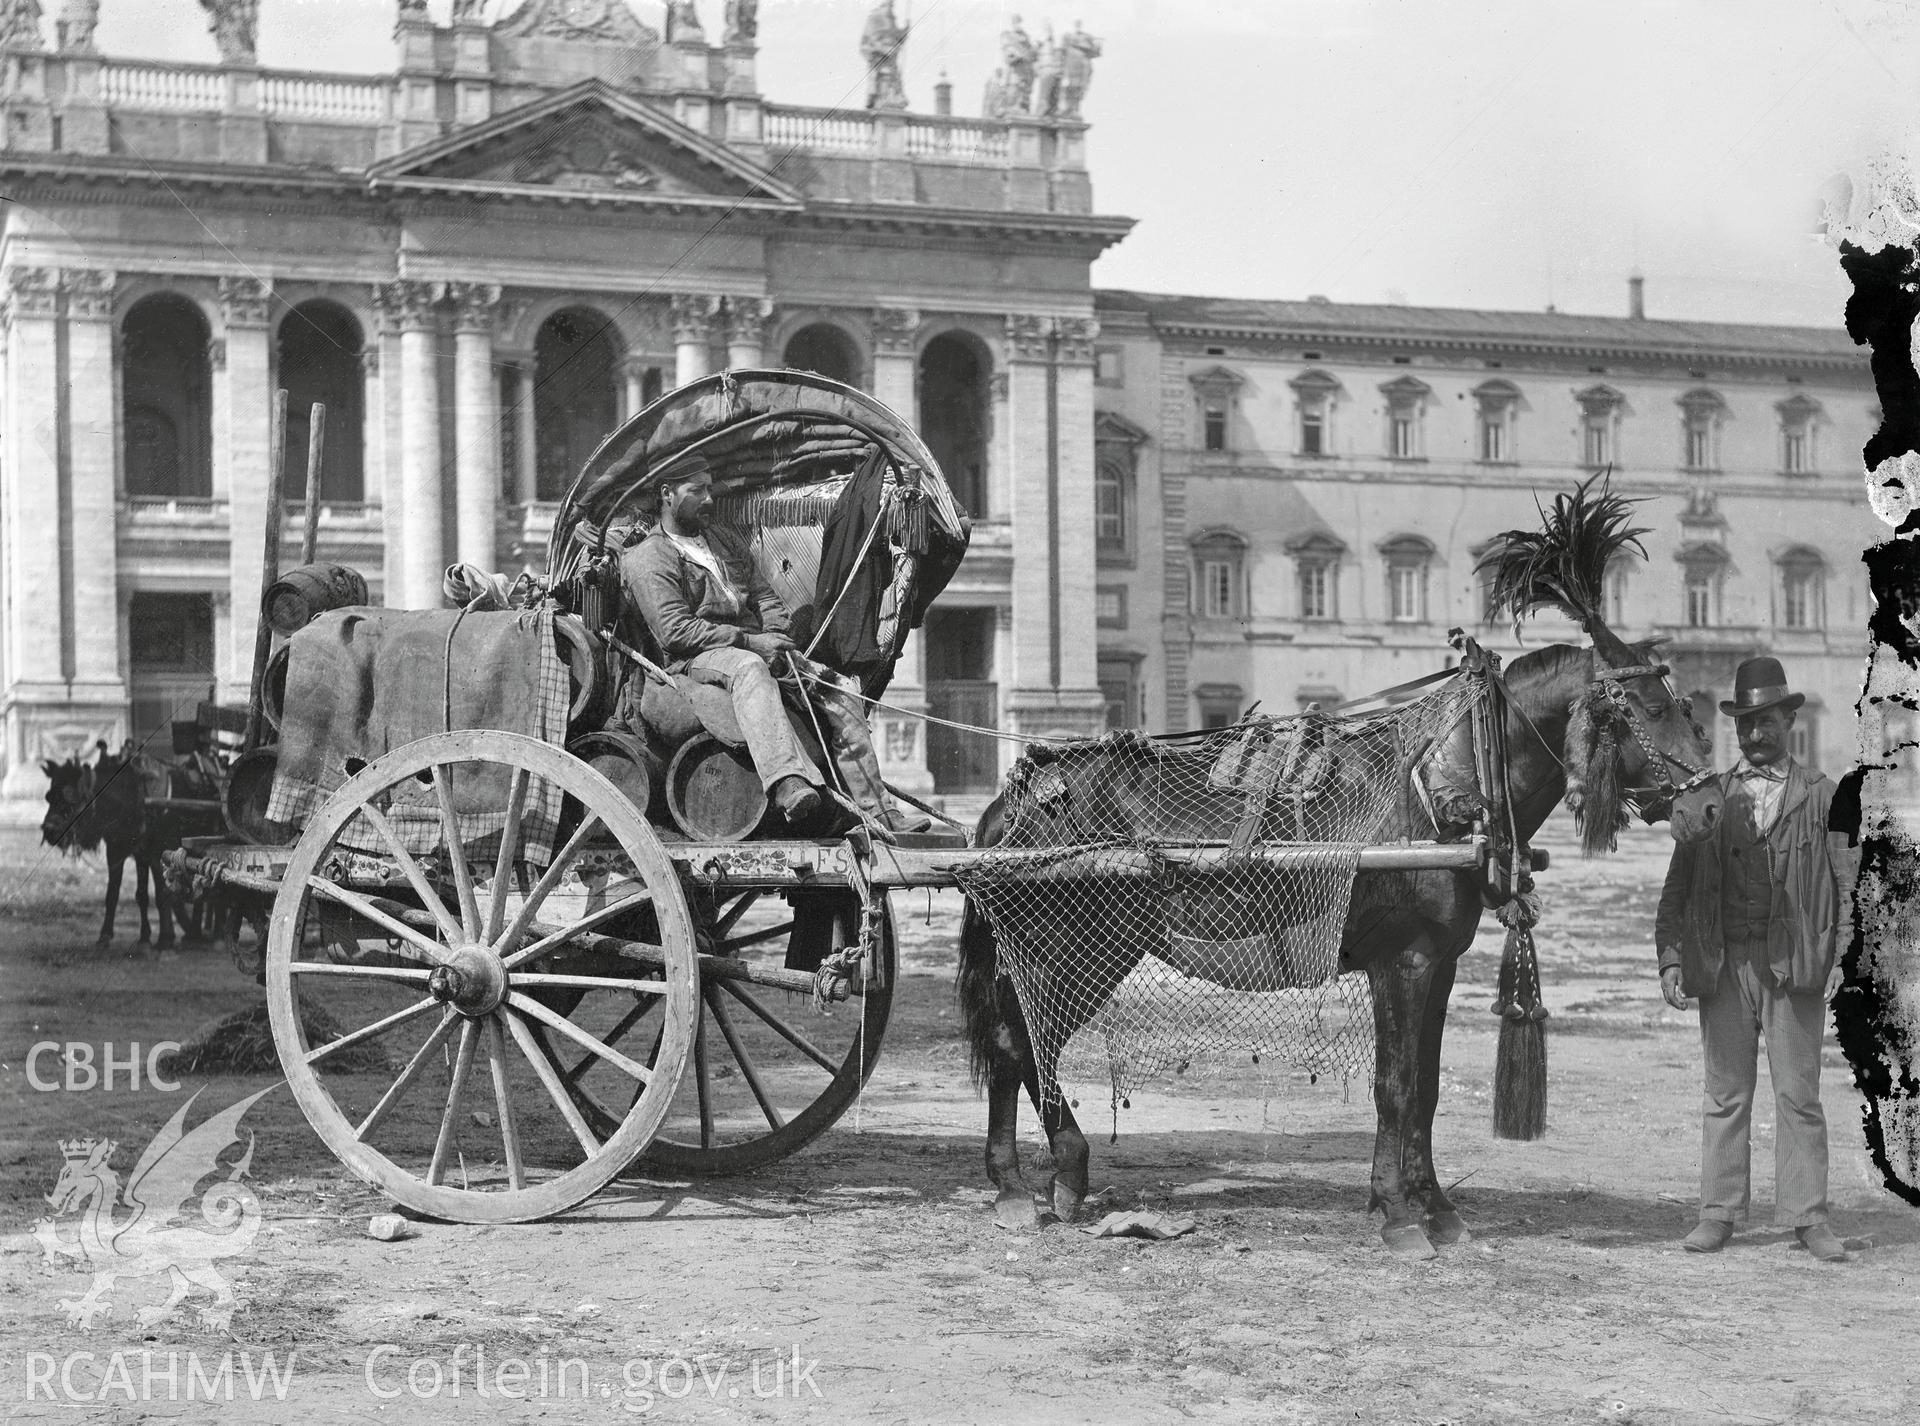 Black and white image dating from c.1910 showing a decorated horse and carriage outside a substantial building, probably European,, taken by Emile T. Evans.